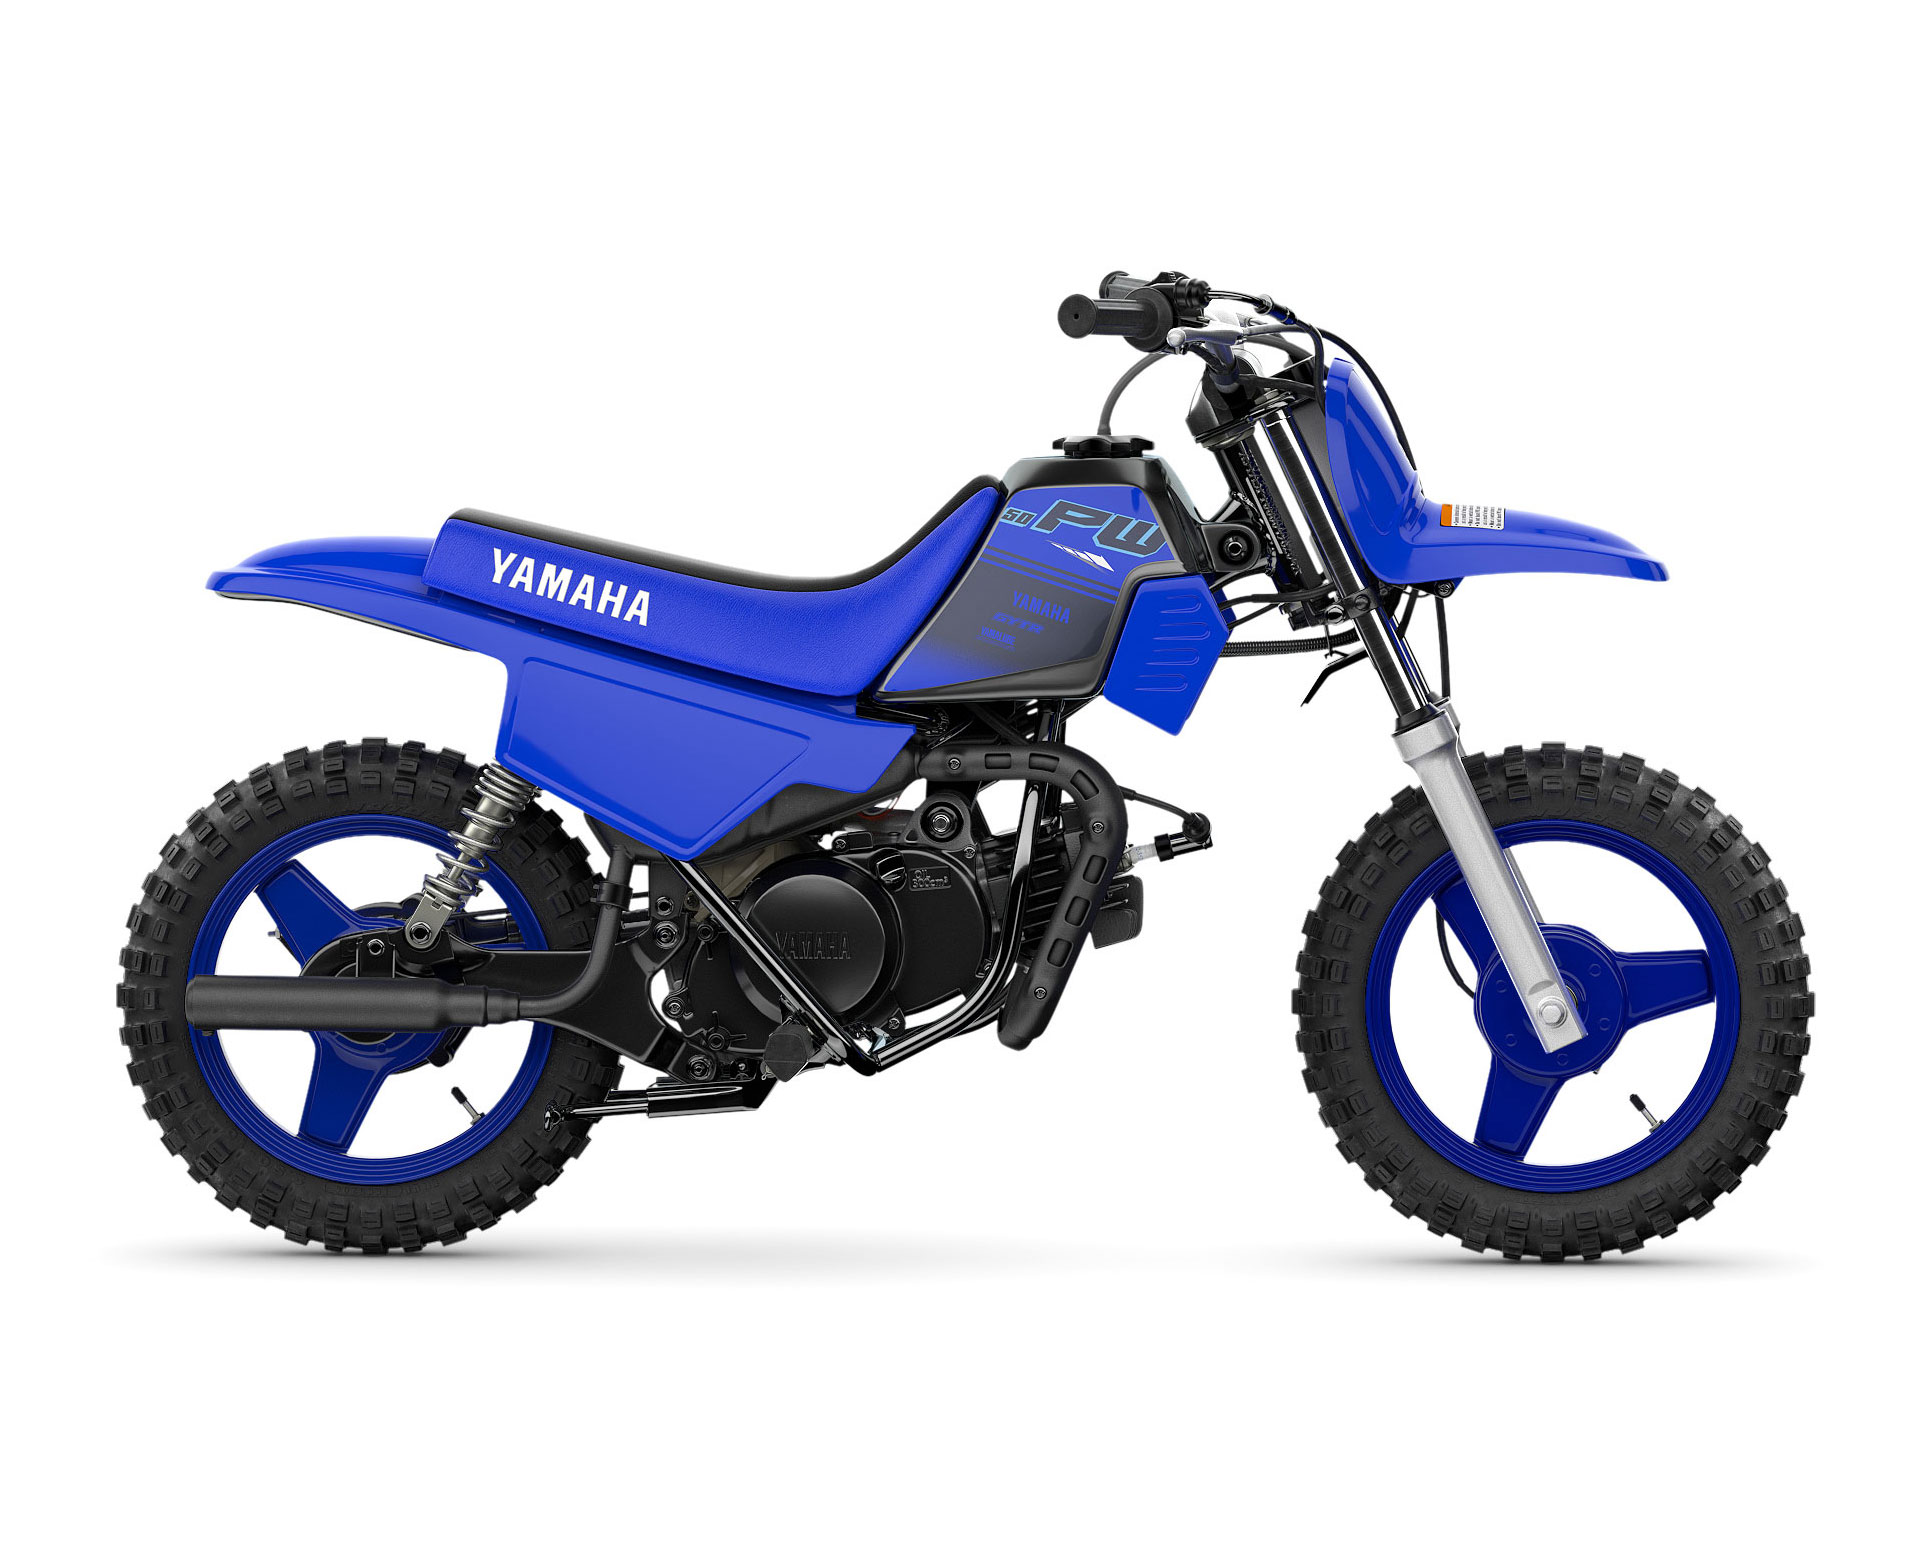 Thumbnail of your customized PW50 2024